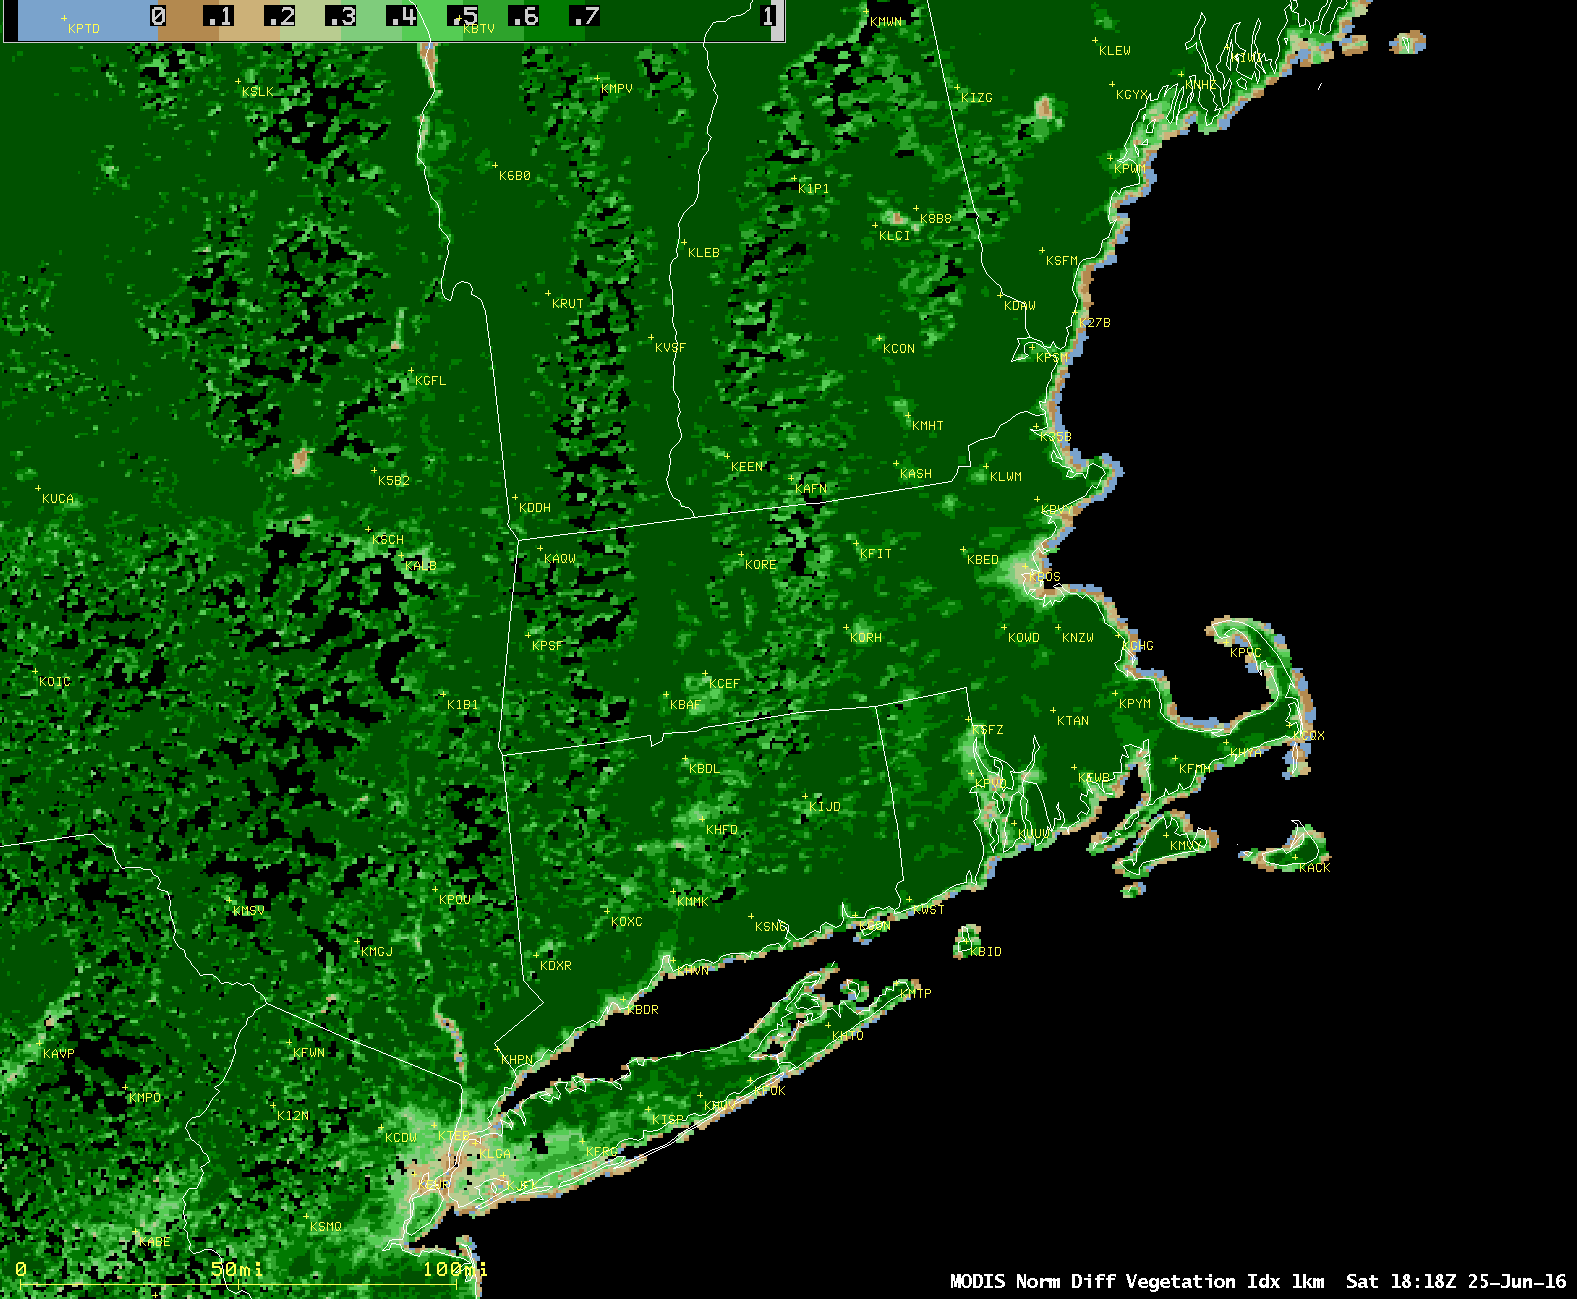 Aqua MODIS Normalized Difference Vegetation Index (NDVI) product [click to enlarge]